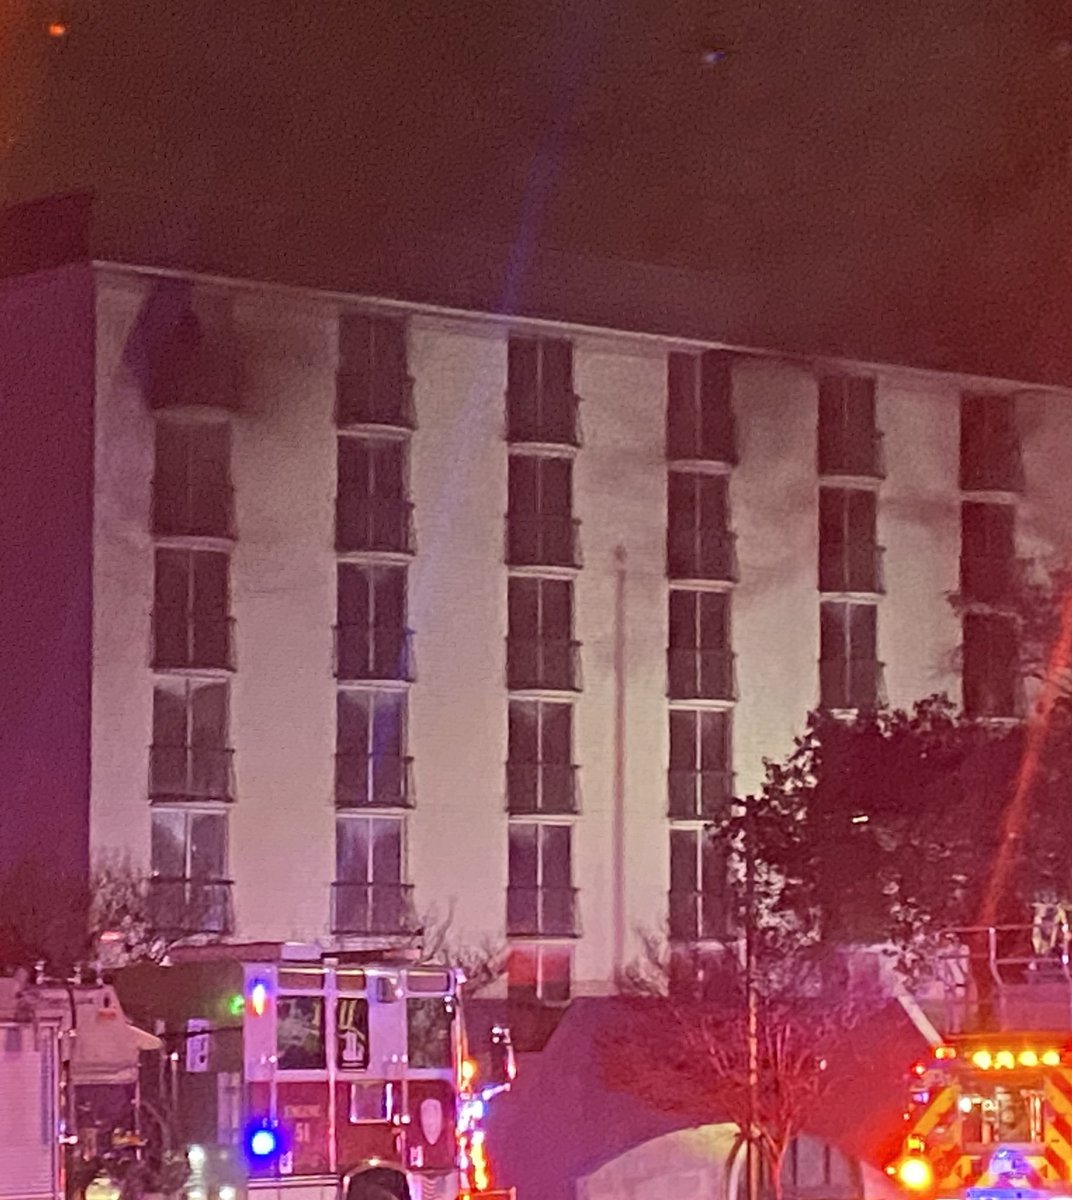 SATXFire on scene of fire at vacant hotel off Loop 410 and Cherry Ridge. Lots of smoke coming from windows